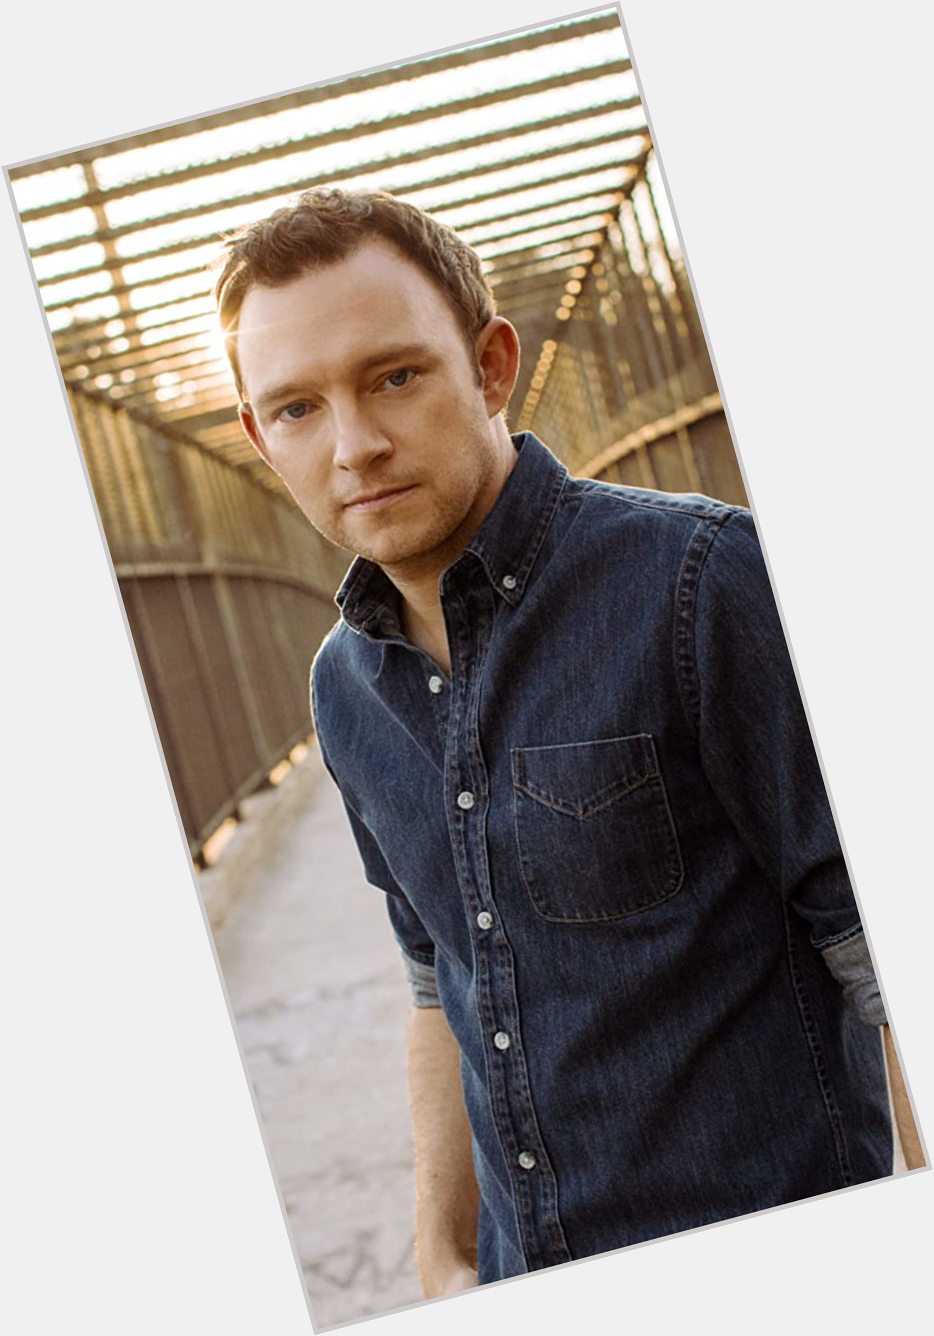 Happy Birthday, Nate Corddry
For Disney, he voiced Zed in the Disney XD animated series, 